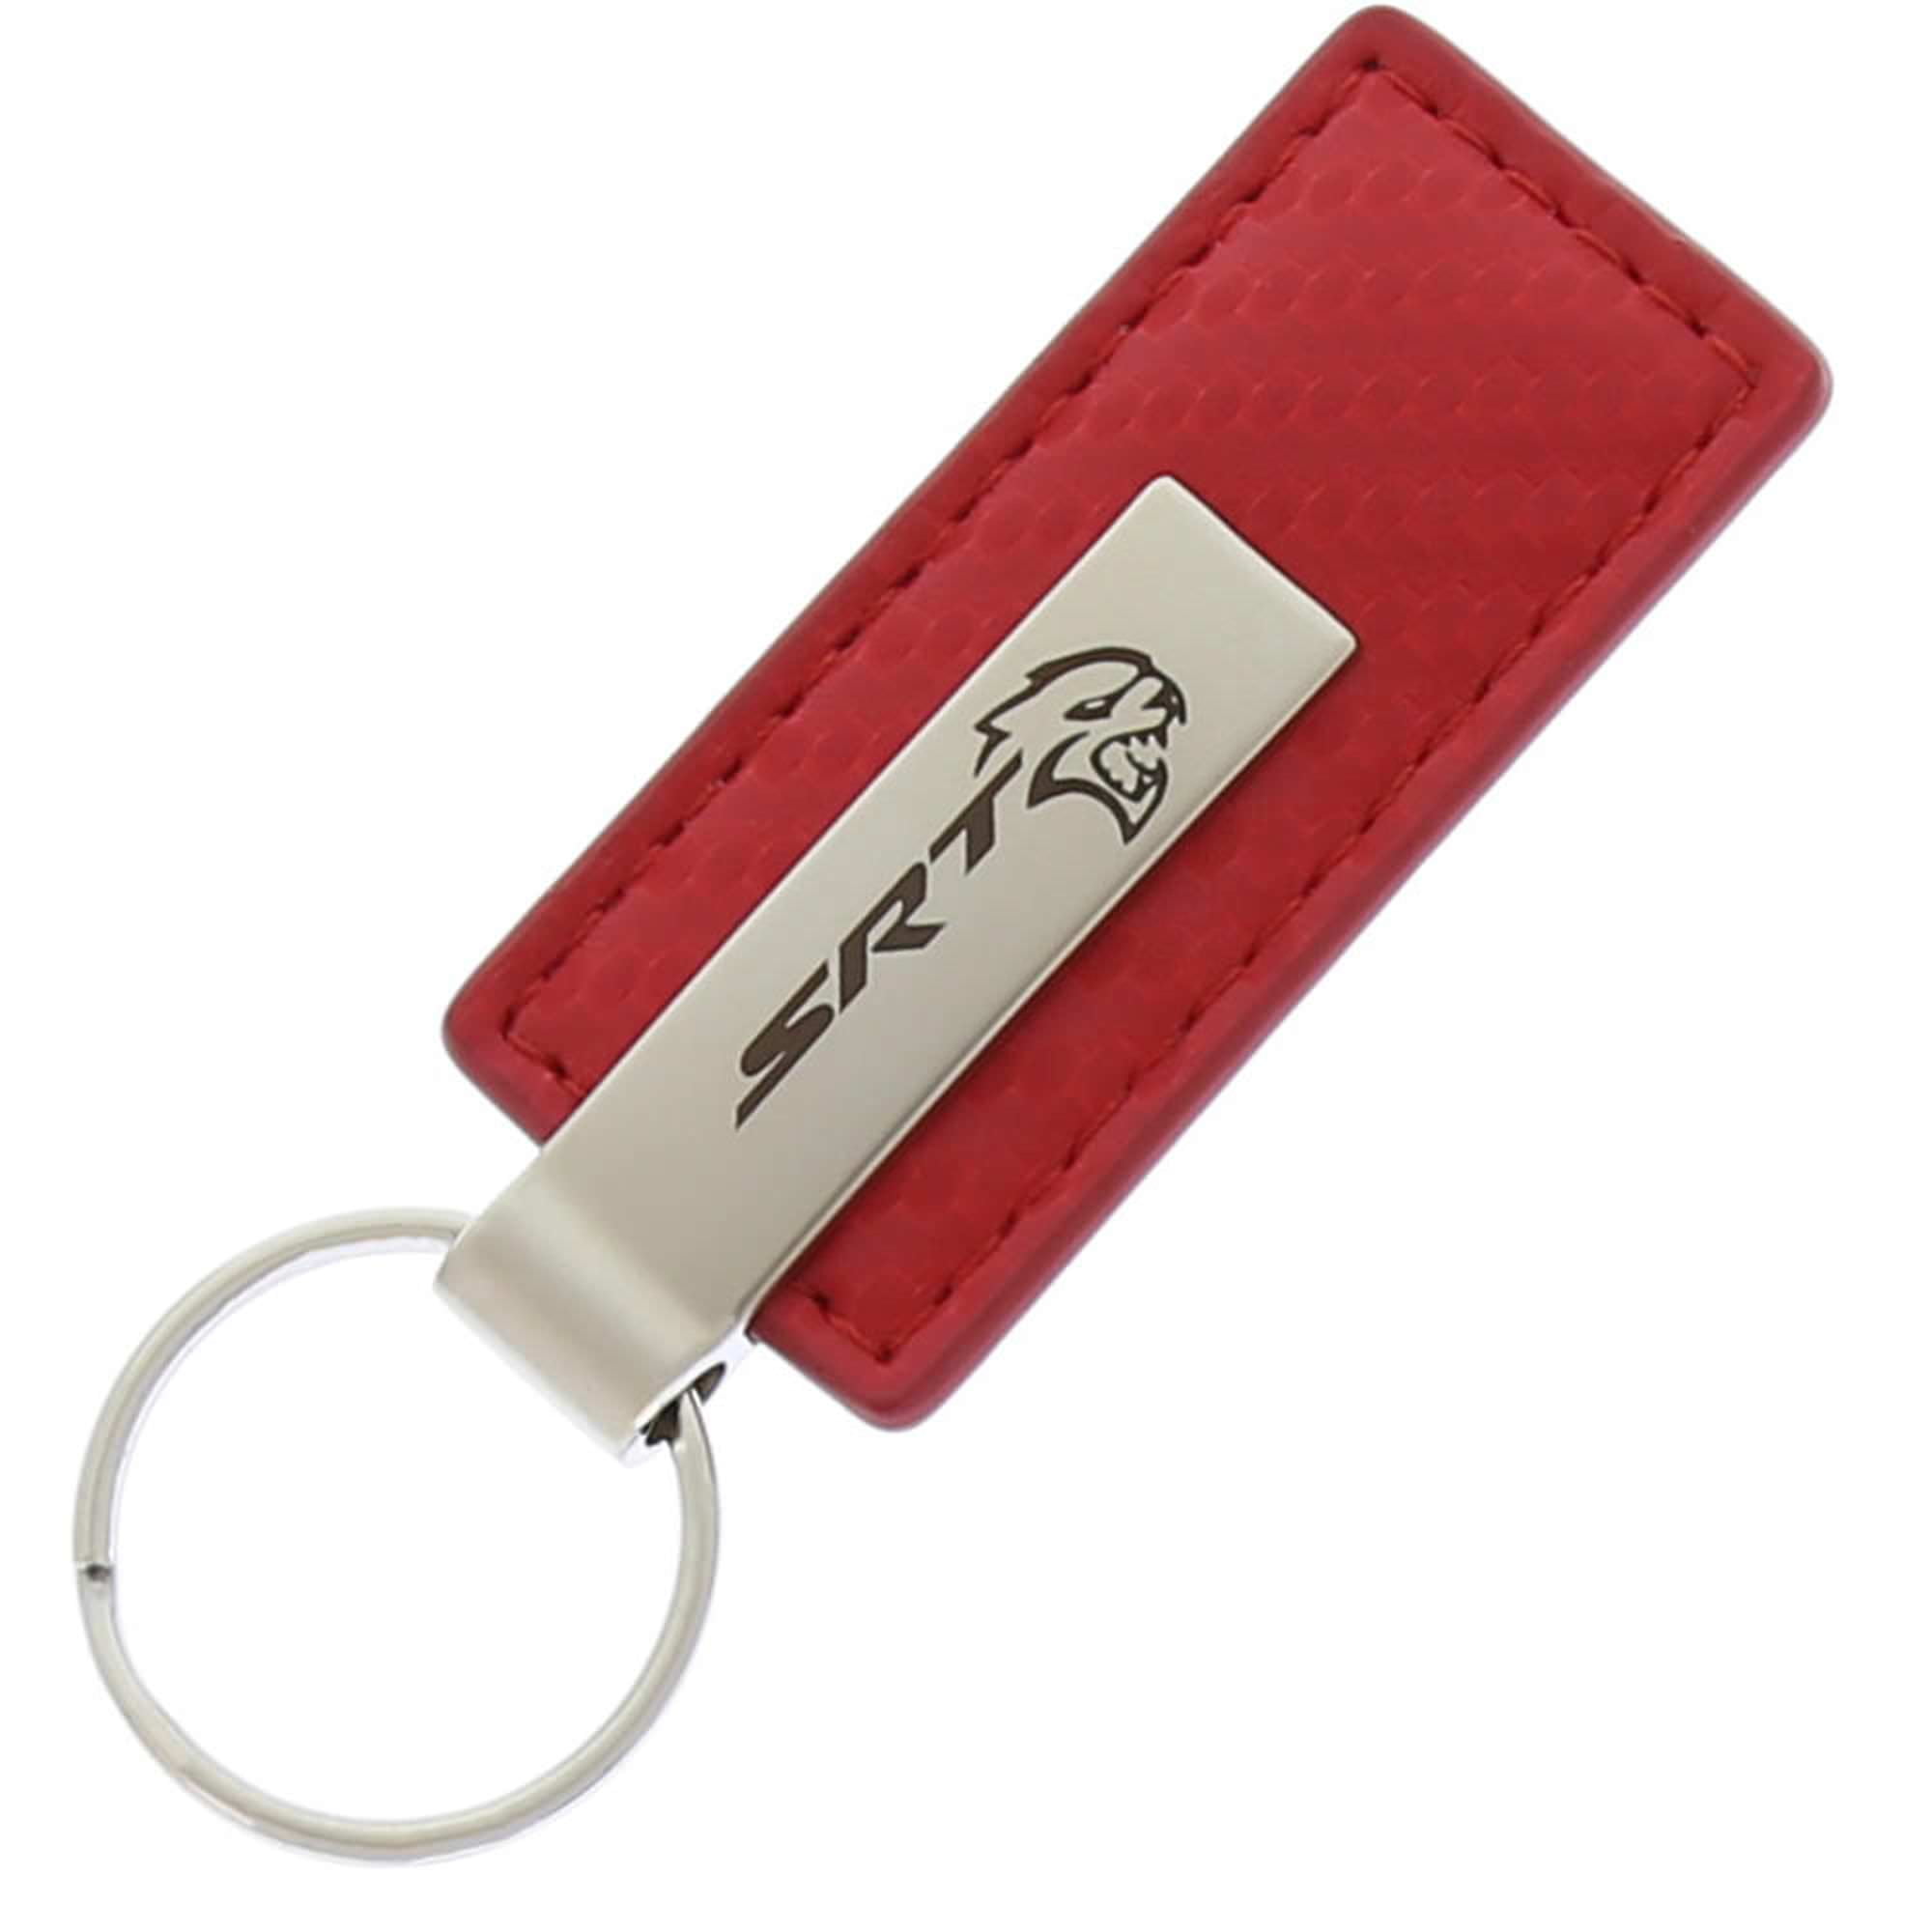 The Royal Standard Louisiana Speckled Metallic Leather Keychain Clip